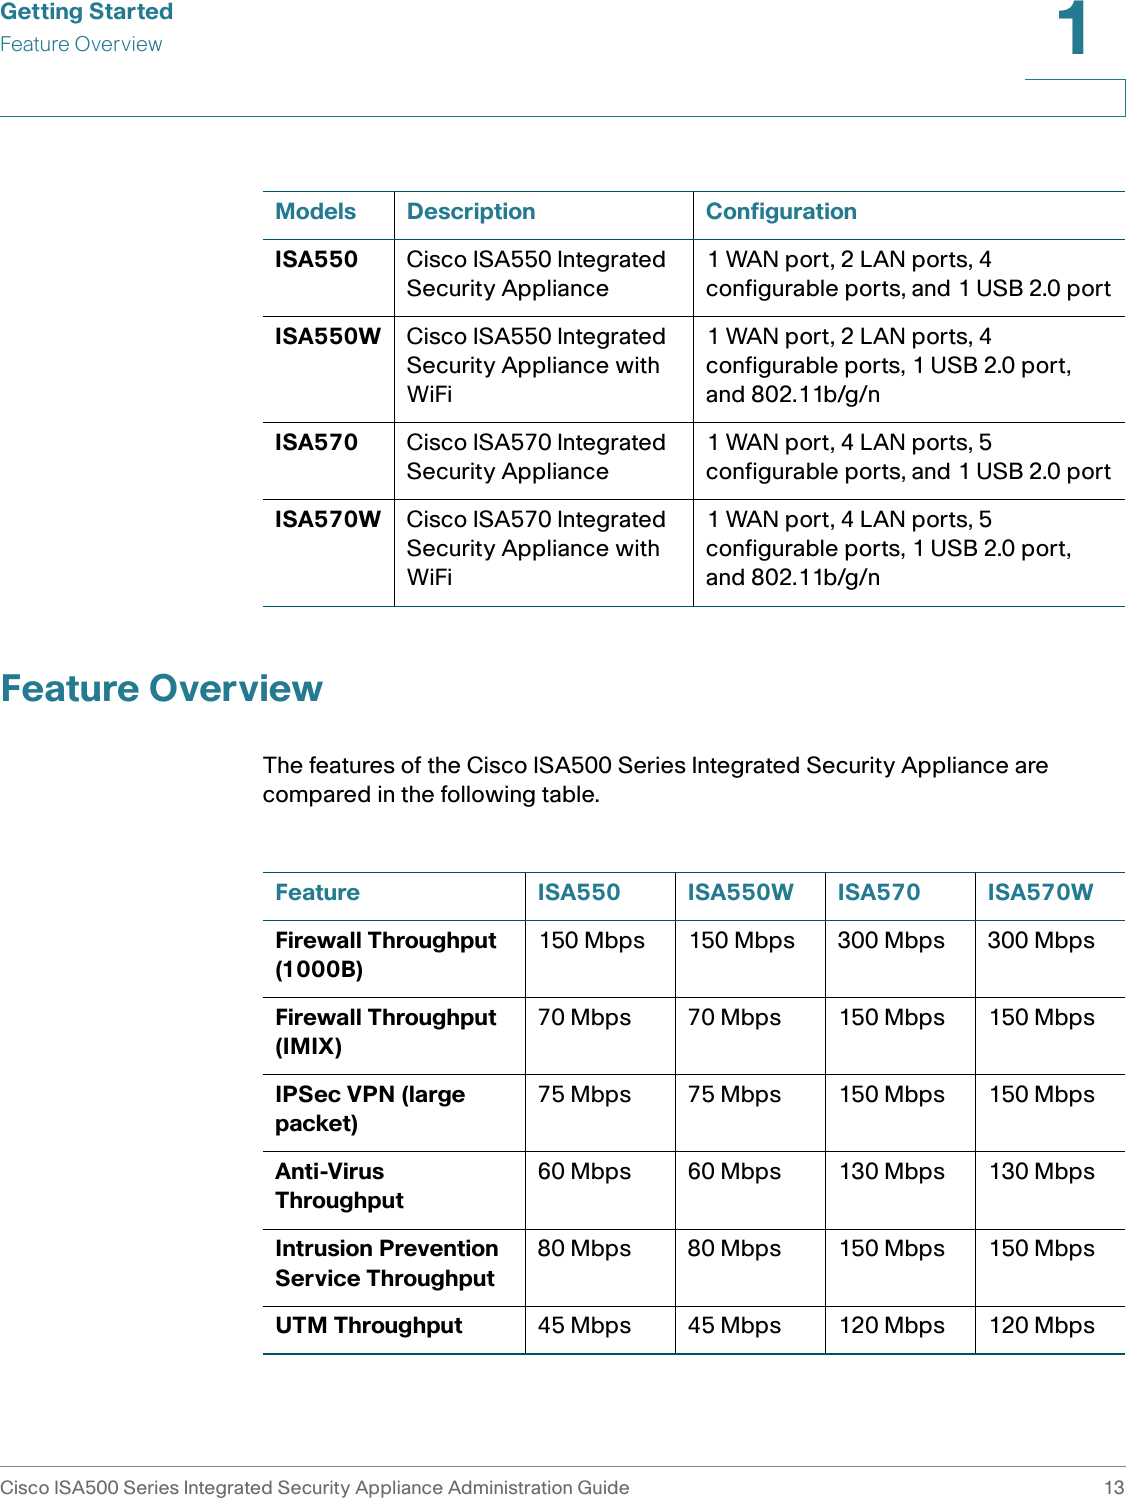 Getting StartedFeature OverviewCisco ISA500 Series Integrated Security Appliance Administration Guide 131 Feature OverviewThe features of the Cisco ISA500 Series Integrated Security Appliance are compared in the following table.Models Description ConfigurationISA550 Cisco ISA550 Integrated Security Appliance1 WAN port, 2 LAN ports, 4 configurable ports, and 1 USB 2.0 portISA550W Cisco ISA550 Integrated Security Appliance with WiFi1 WAN port, 2 LAN ports, 4  configurable ports, 1 USB 2.0 port, and 802.11b/g/nISA570 Cisco ISA570 Integrated Security Appliance1 WAN port, 4 LAN ports, 5  configurable ports, and 1 USB 2.0 portISA570W Cisco ISA570 Integrated Security Appliance with WiFi1 WAN port, 4 LAN ports, 5  configurable ports, 1 USB 2.0 port, and 802.11b/g/nFeature ISA550 ISA550W ISA570 ISA570WFirewall Throughput (1000B)150 Mbps 150 Mbps 300 Mbps 300 MbpsFirewall Throughput (IMIX)70 Mbps 70 Mbps 150 Mbps 150 MbpsIPSec VPN (large packet)75 Mbps 75 Mbps 150 Mbps 150 MbpsAnti-Virus Throughput60 Mbps 60 Mbps 130 Mbps 130 MbpsIntrusion Prevention Service Throughput80 Mbps 80 Mbps 150 Mbps 150 MbpsUTM Throughput 45 Mbps 45 Mbps 120 Mbps 120 Mbps